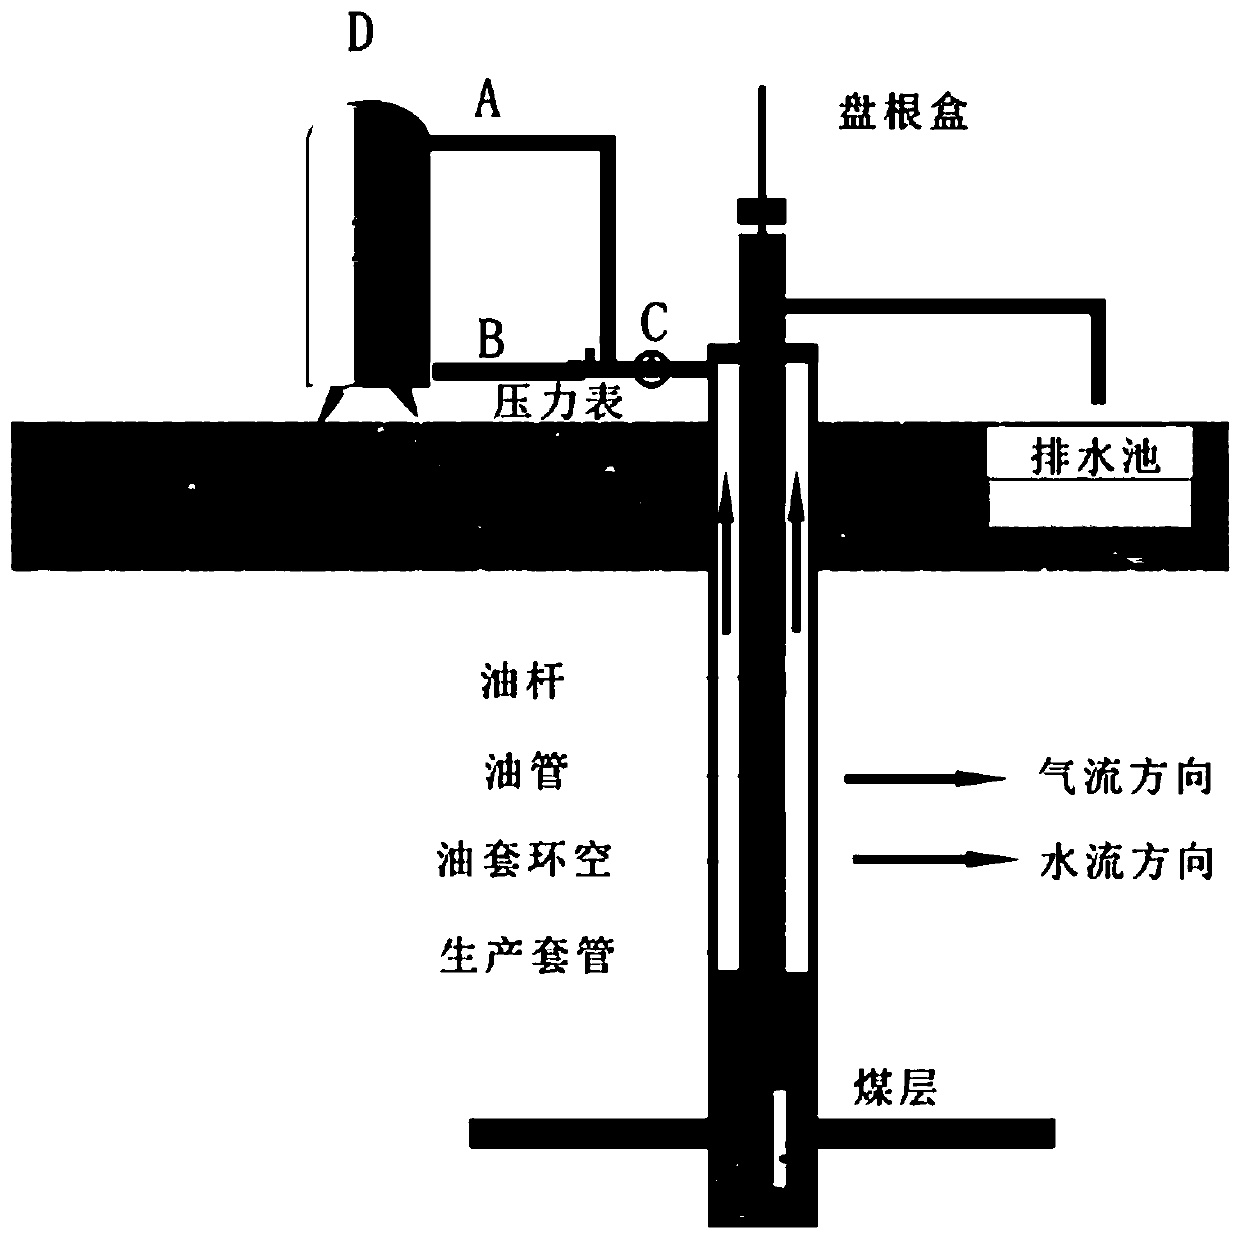 Efficient flowback method of pulverized coal for coal-bed gas well